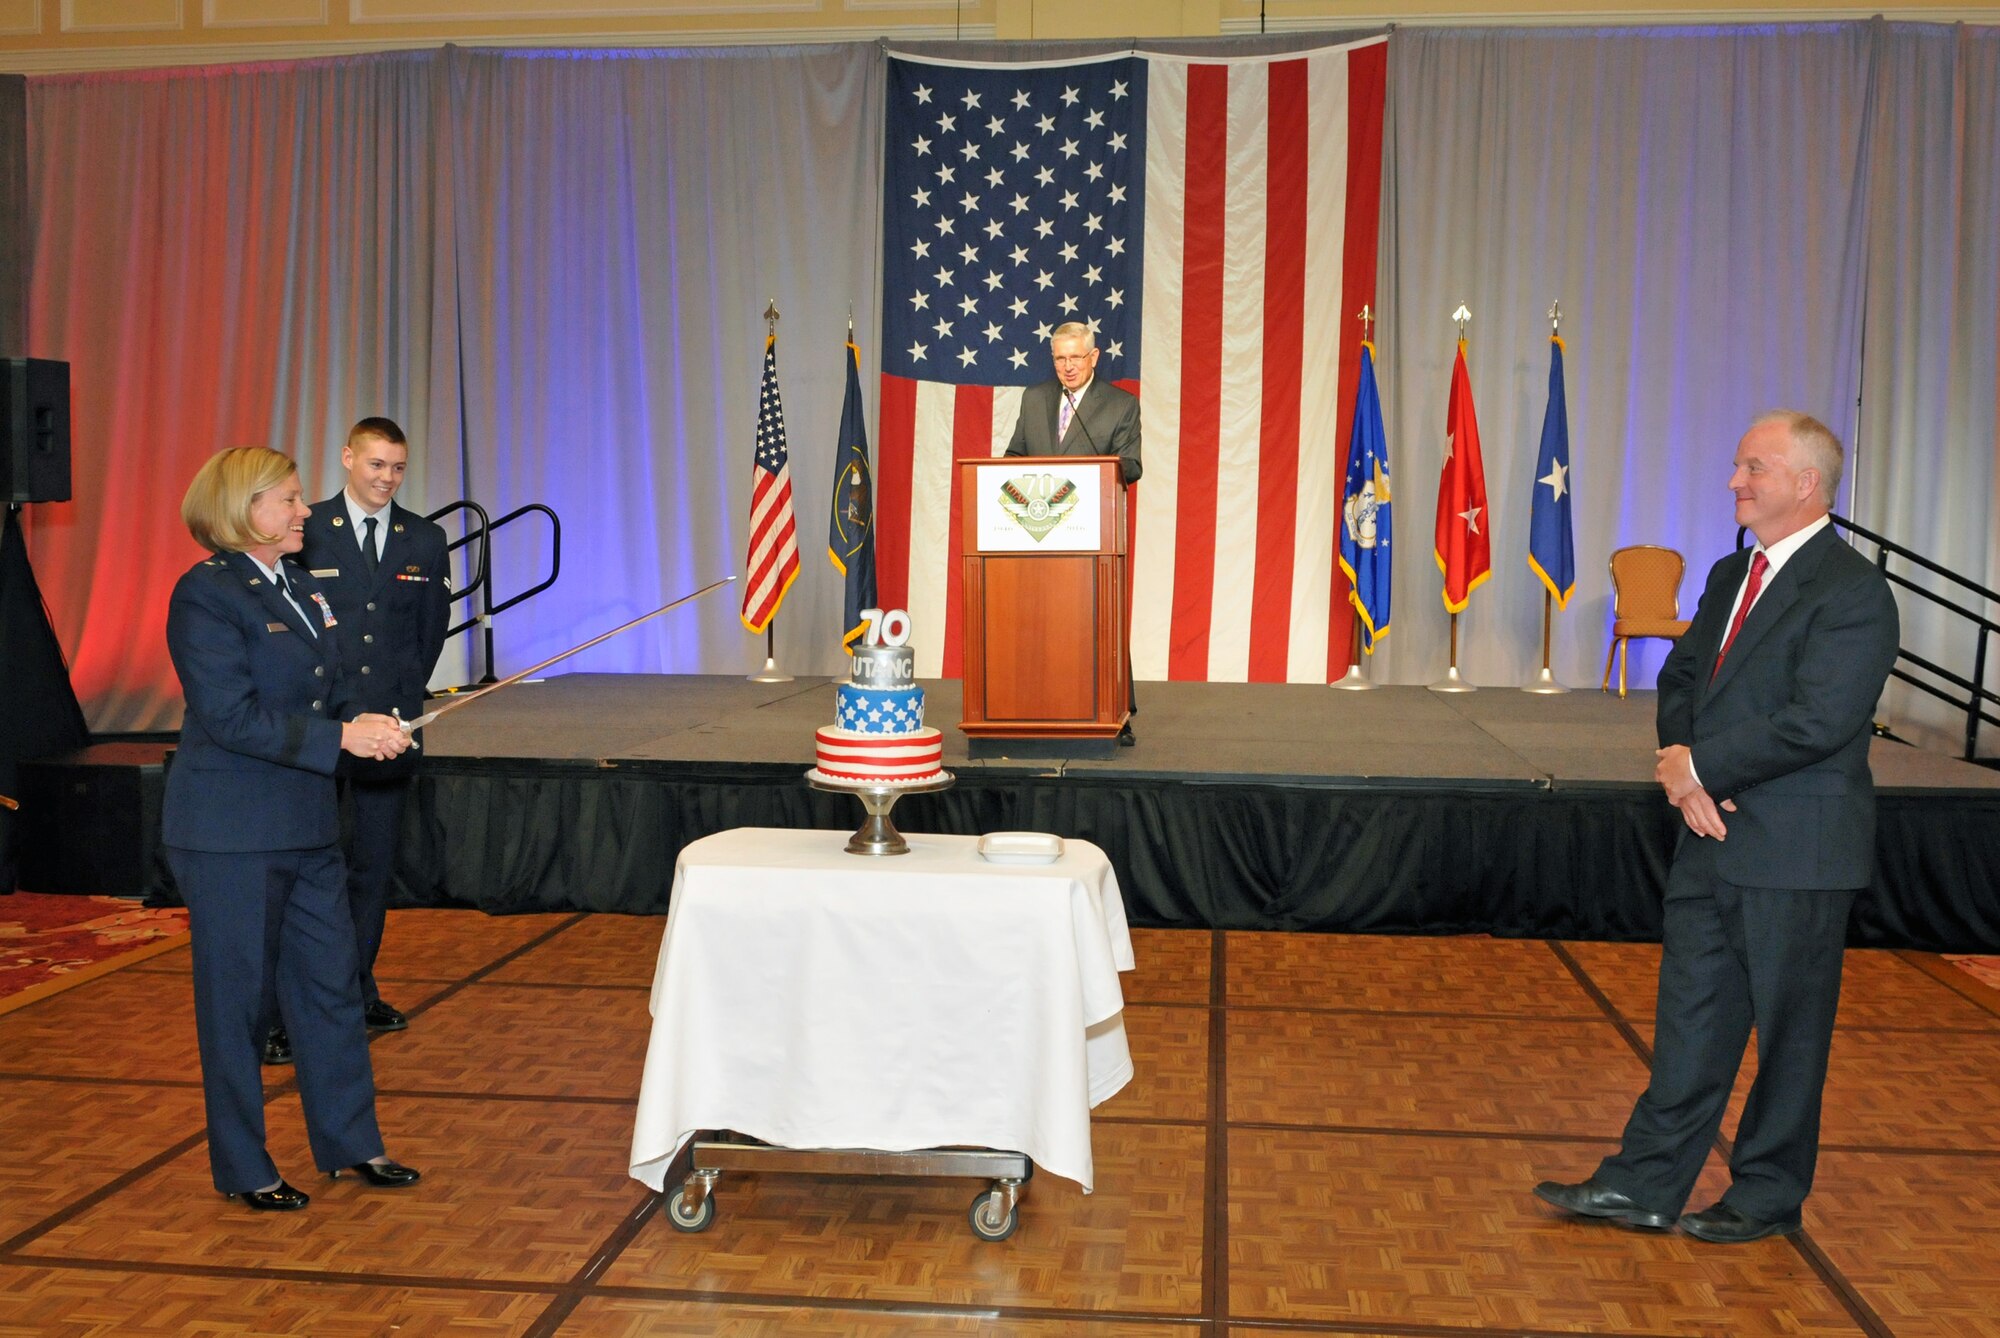 Brig. Gen. Christine Burckle, Utah Air National Guard Commander, prepares to cut the cake at the Utah Air National Guard 70th Anniversary Gala on Nov. 4, 2016, at The Grand America Hotel in Salt Lake City. More than 450 military and civilian guests attended the event hosted by the Utah Air Force Association. (U.S. Air National Guard photo by Staff Sgt. Annie Edwards)